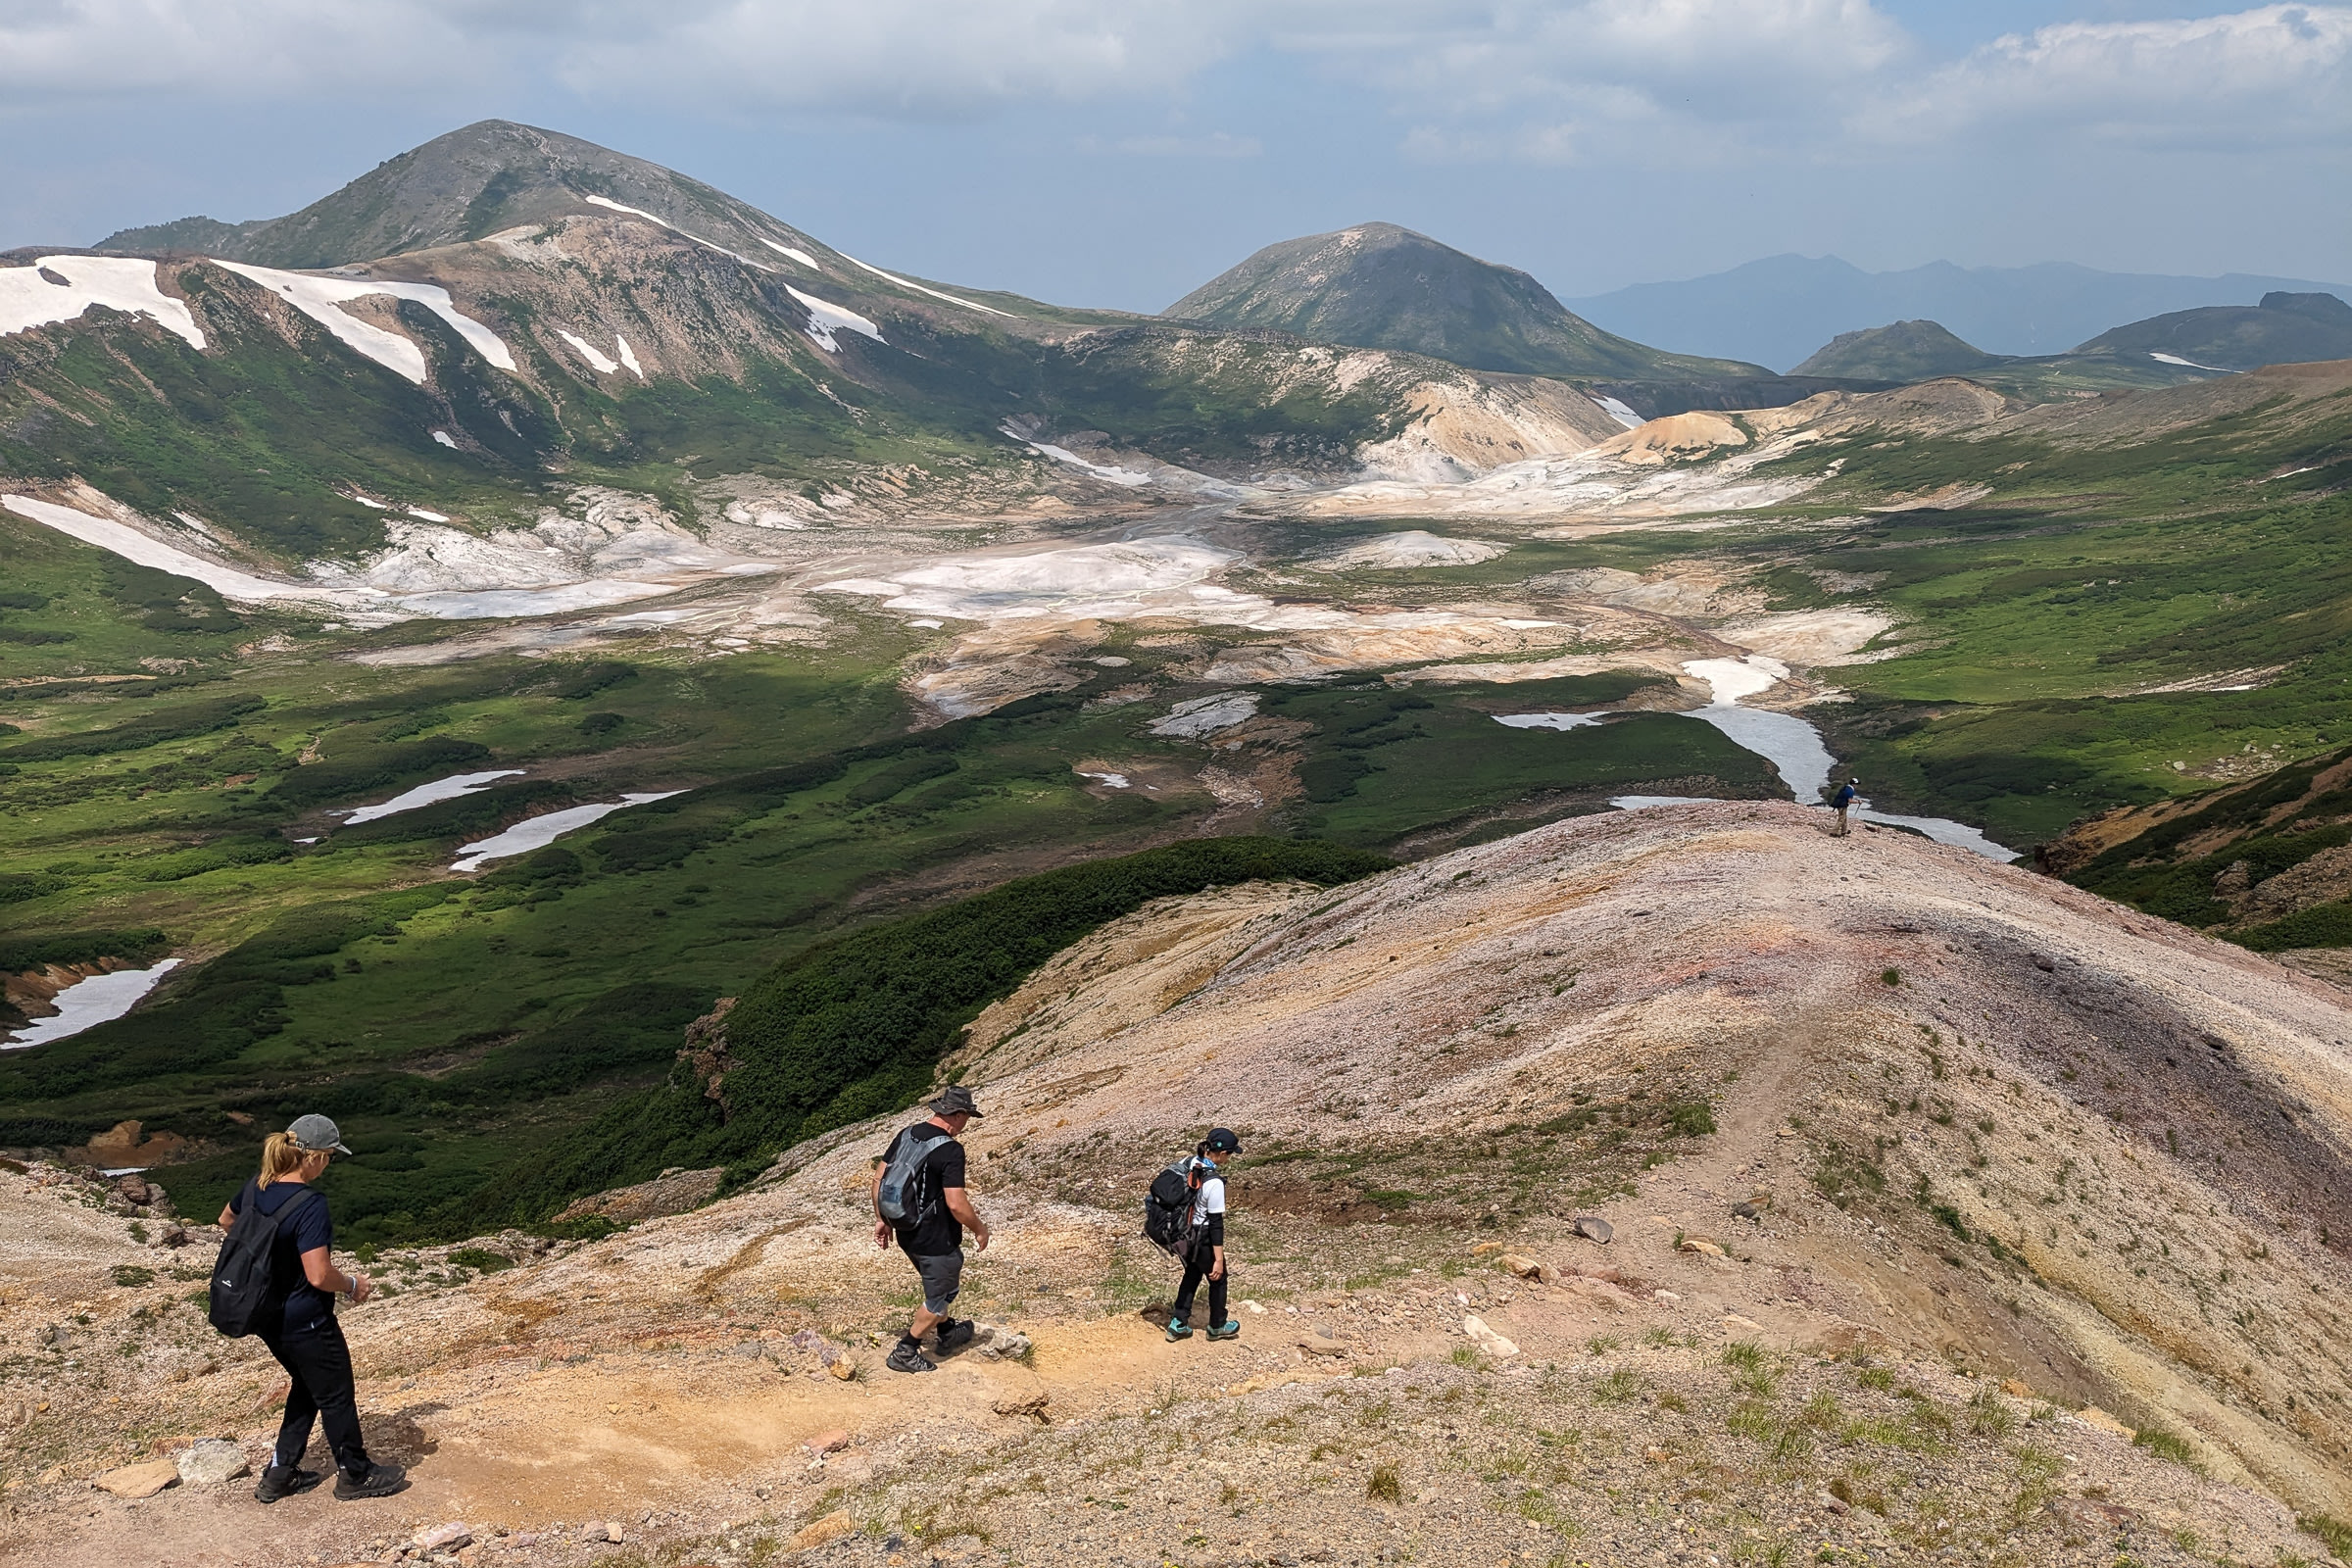 Three hikers descend down a mountain ridge line, in view of the Ohachidaira Caldera. There is lingering snow on the mountains around the caldera.